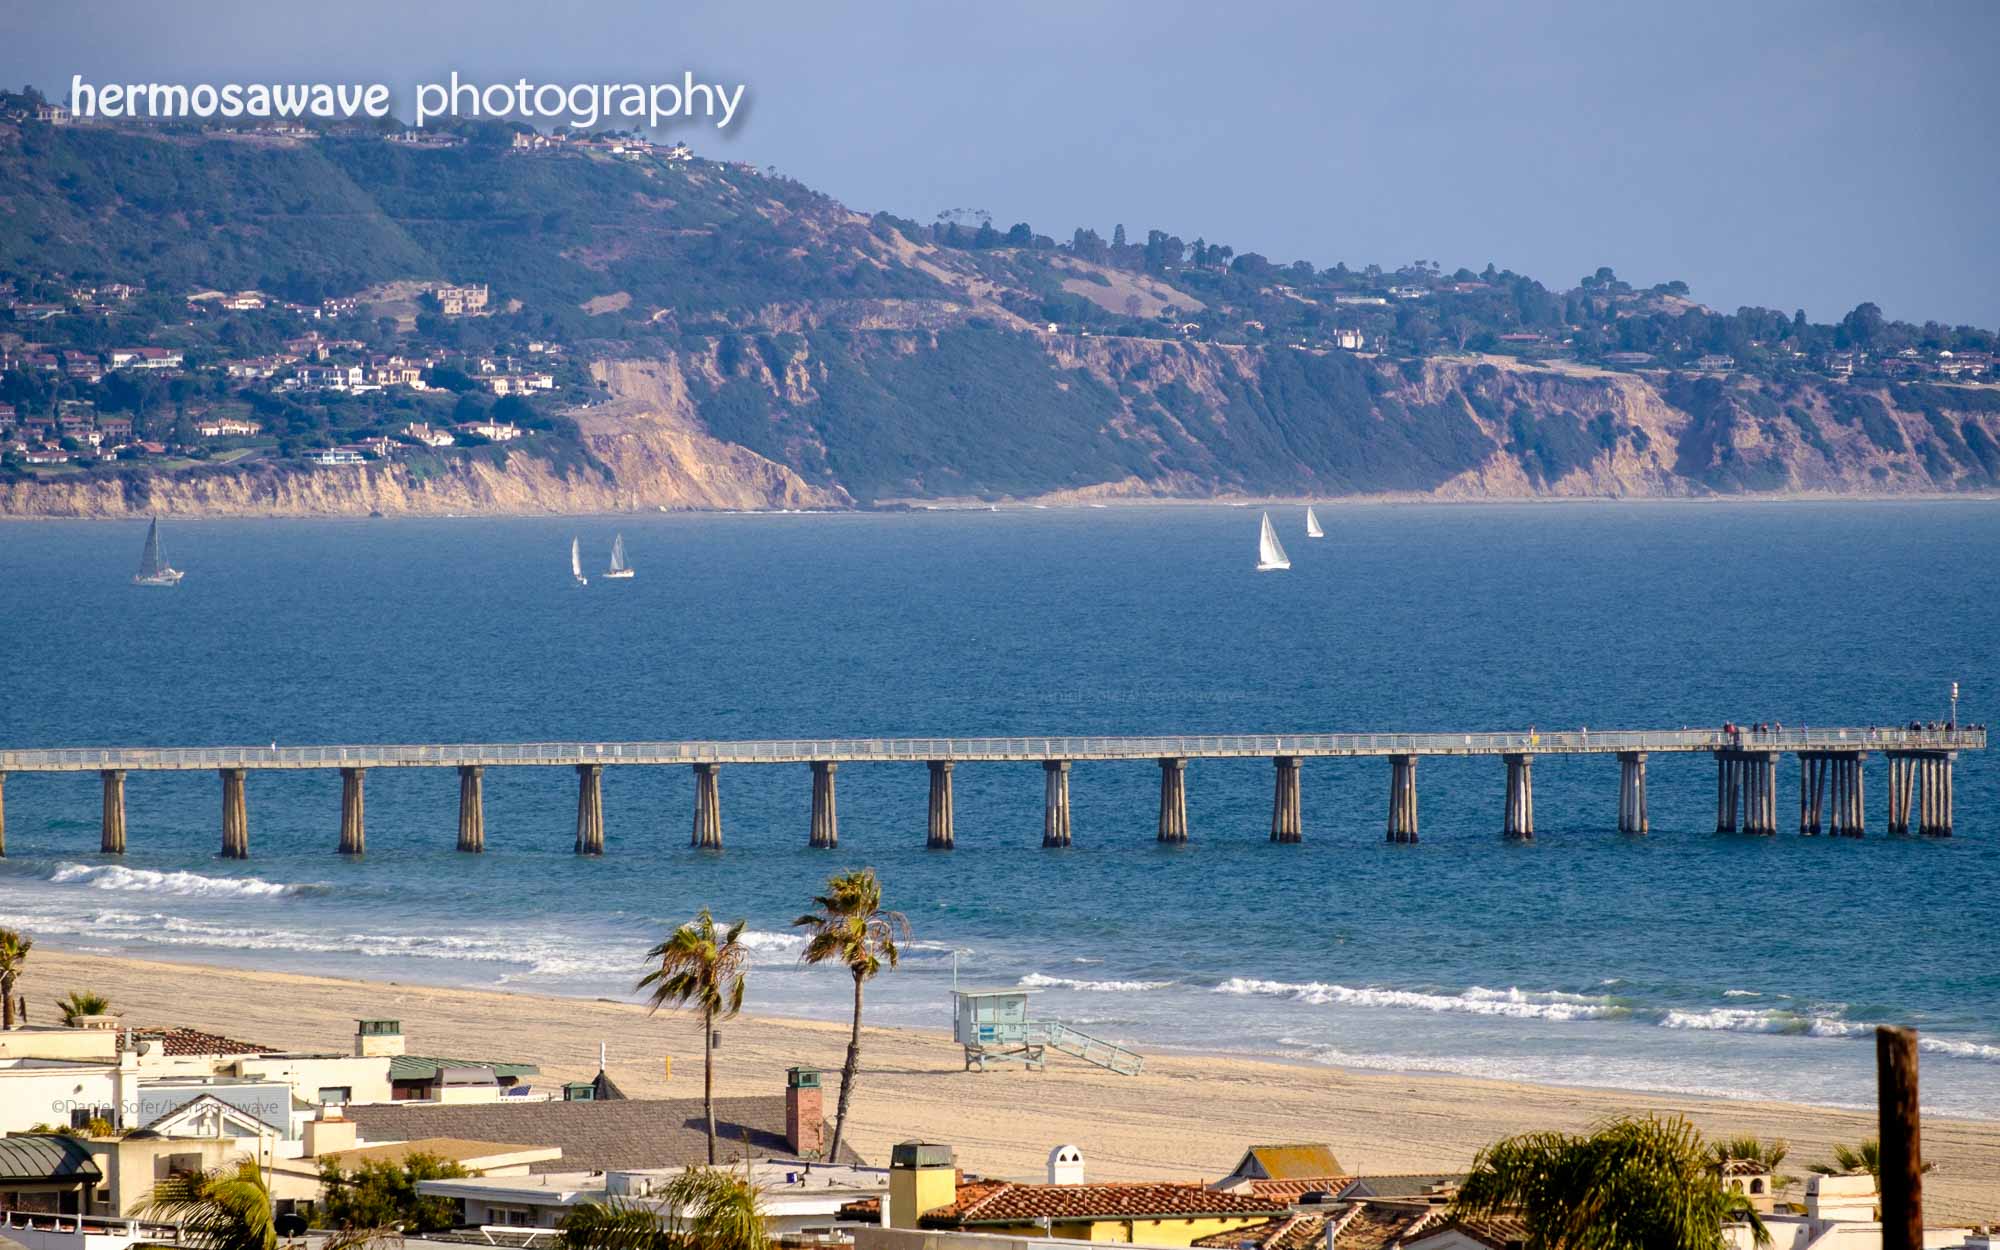 Sailboats and the Pier